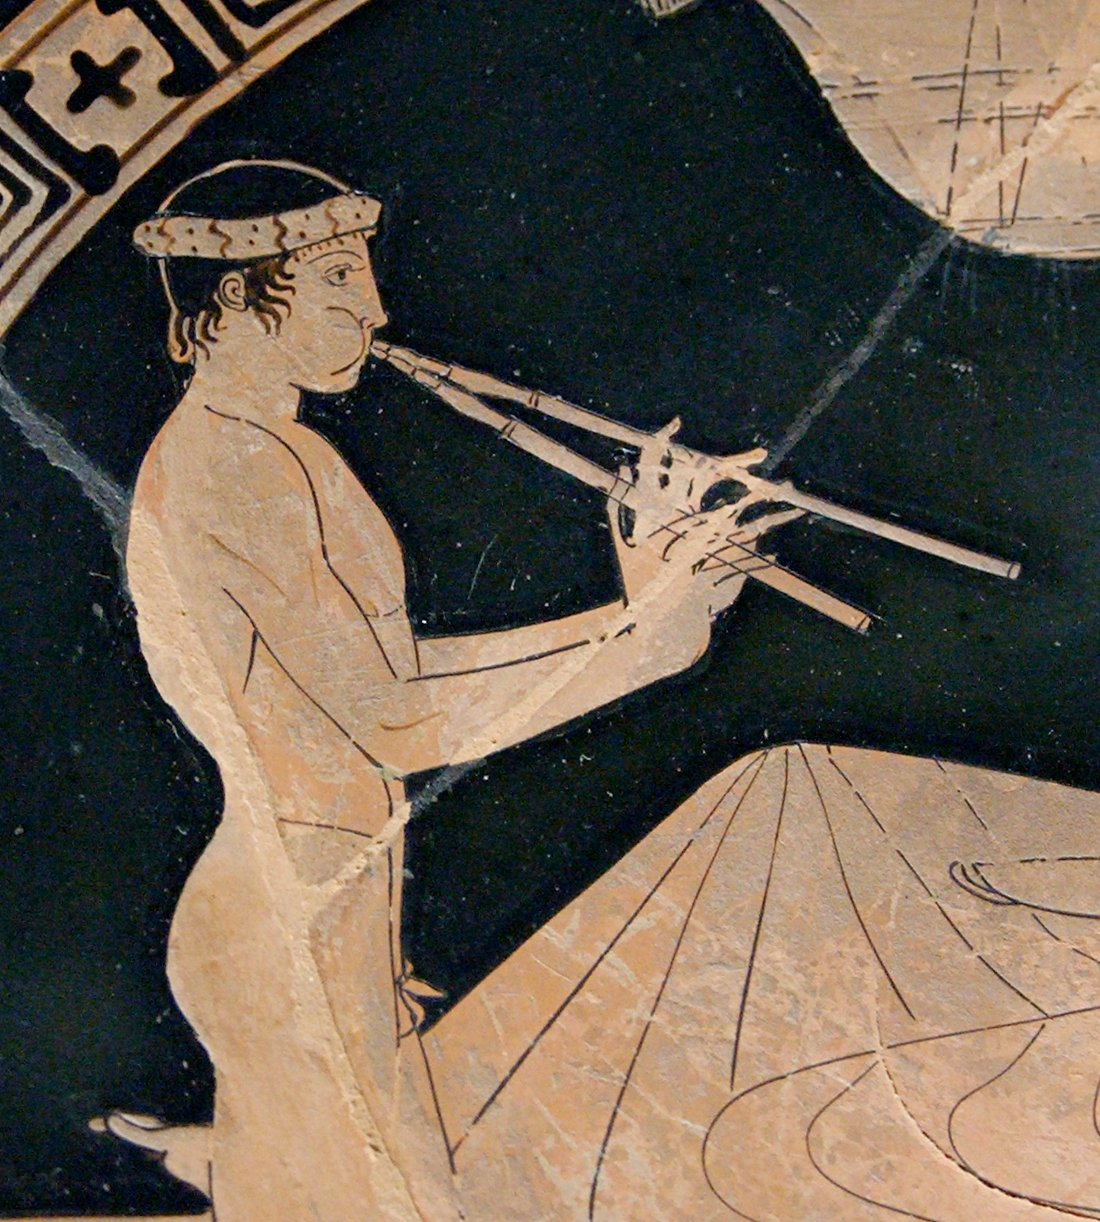 Now We Finally Know What Ancient Greek Music Sounded Like